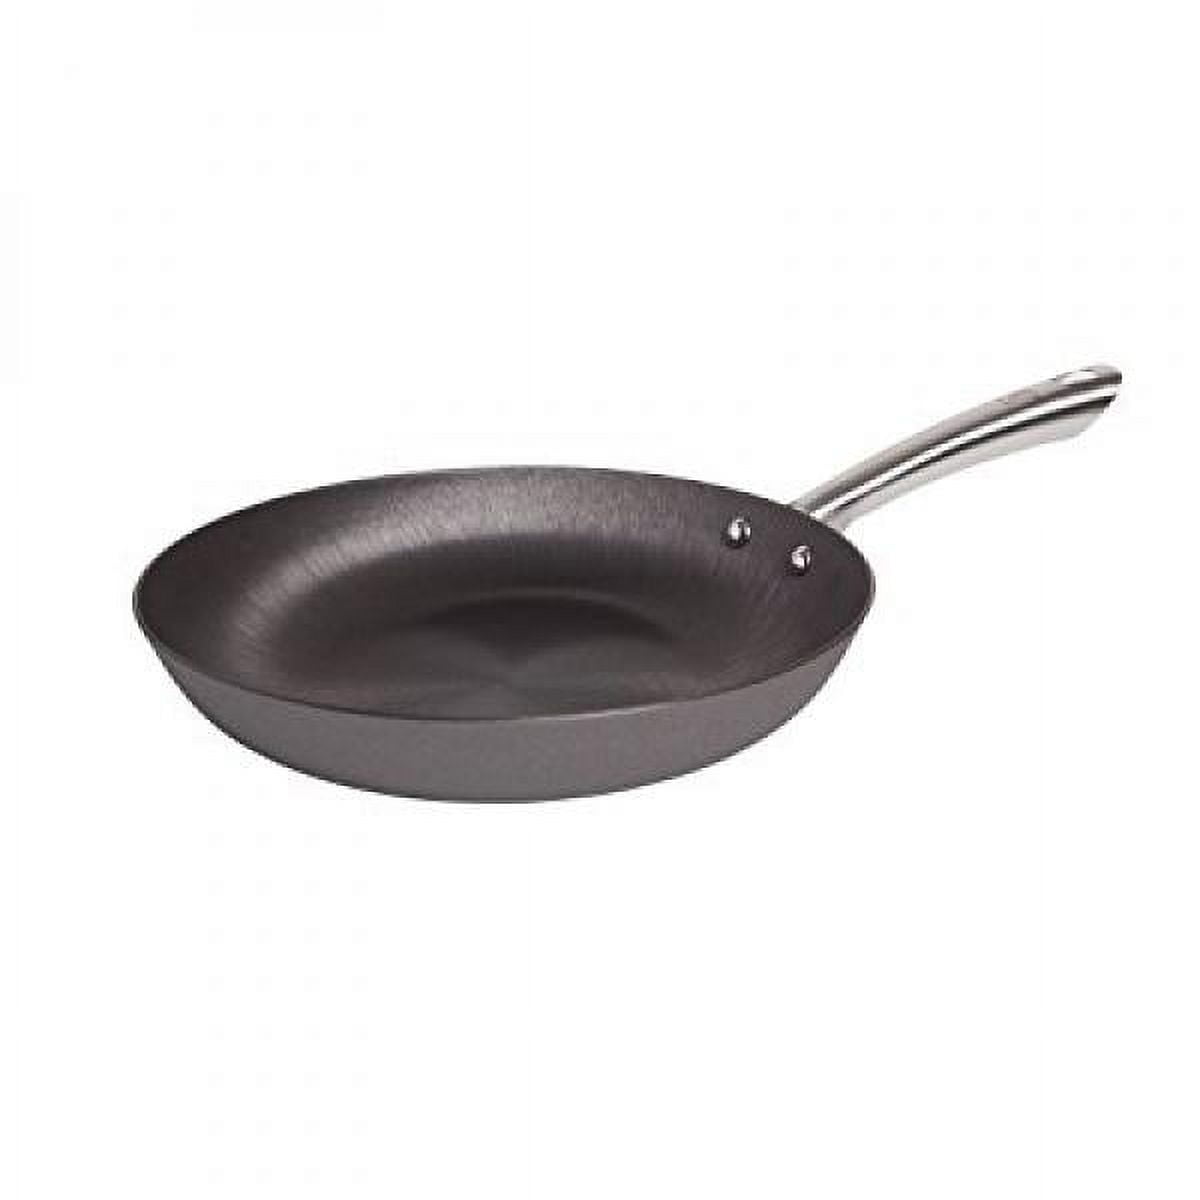 IKO Lightweight Kosher Cast Iron Pan, Heavy Duty Stainless Steel Handle,  Vegetable Based Pre-Seasoned Non-Stick Easy to Clean Interior, Safe on All